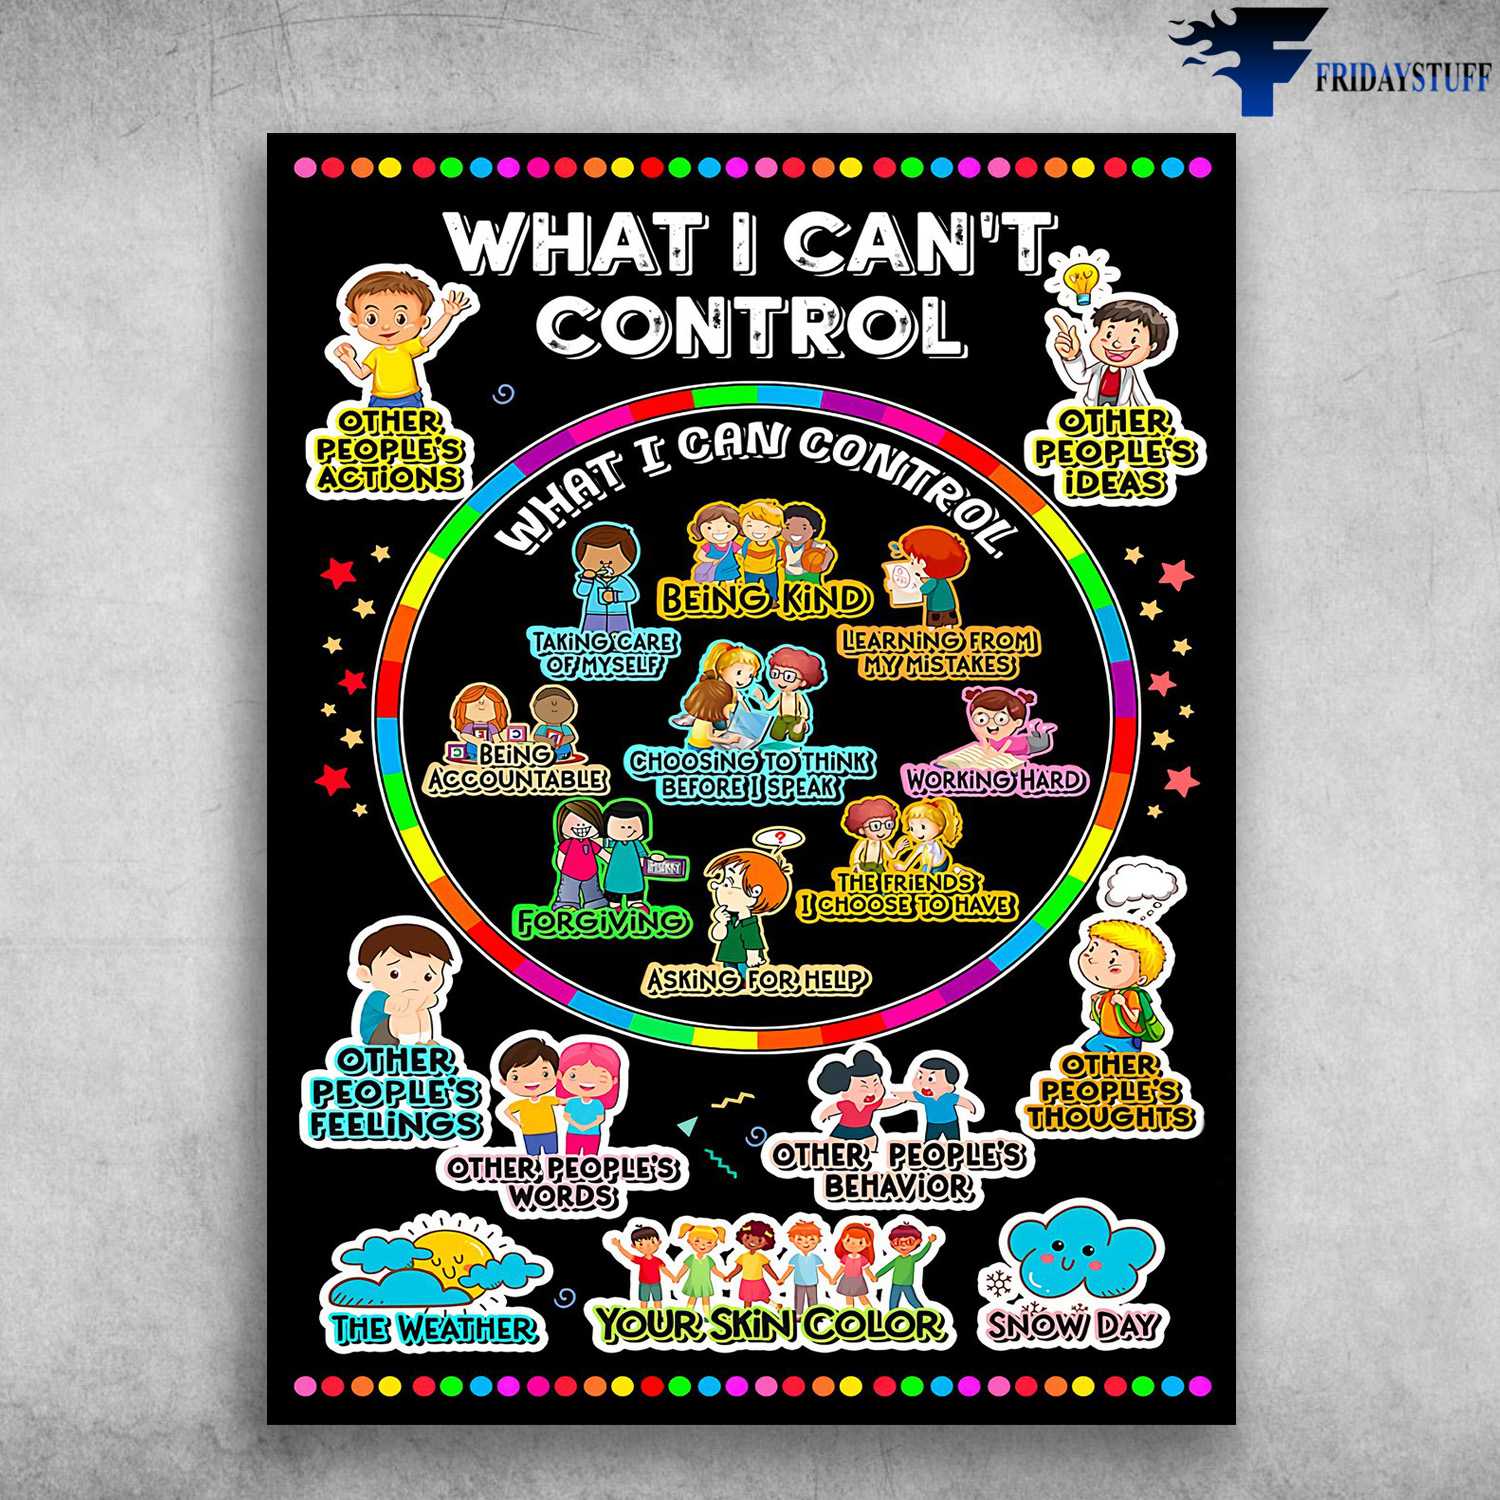 Classroom Poster - What Things You Can't Control, What Thinks You Can Control, Control Yourself